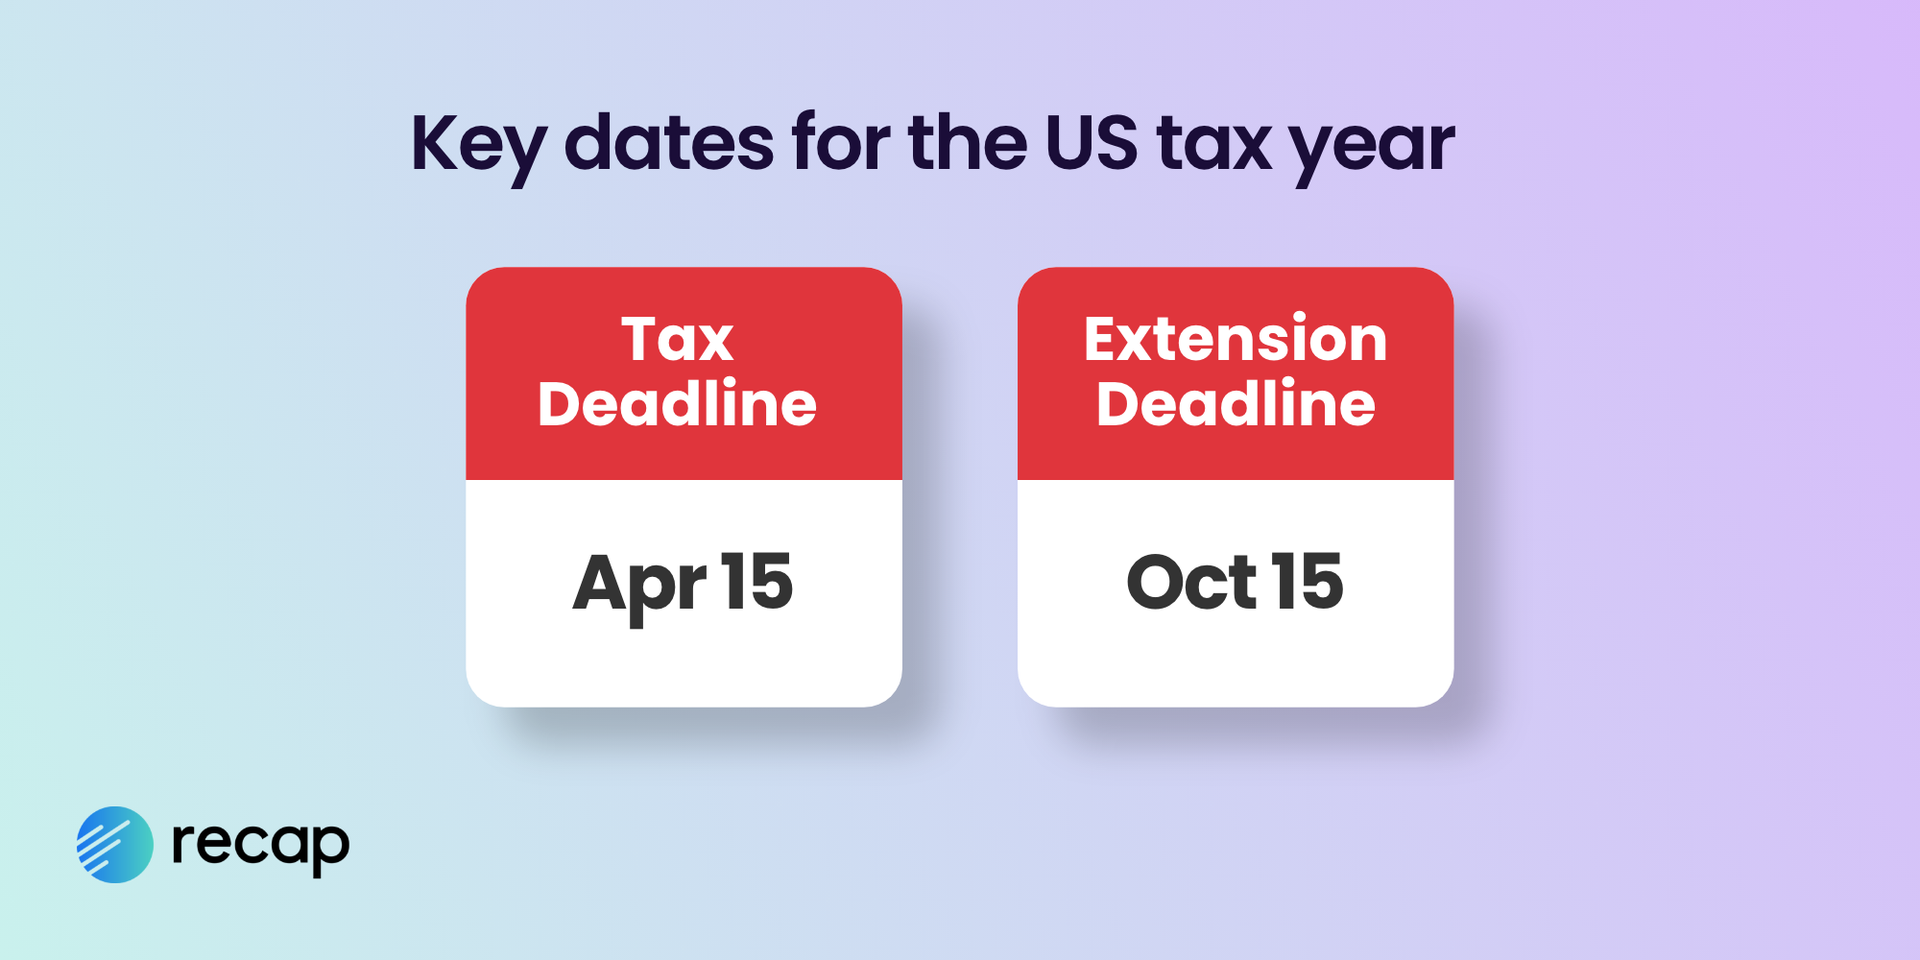 Infographic showing the US tax deadline April 15th and Extension deadline October 15th